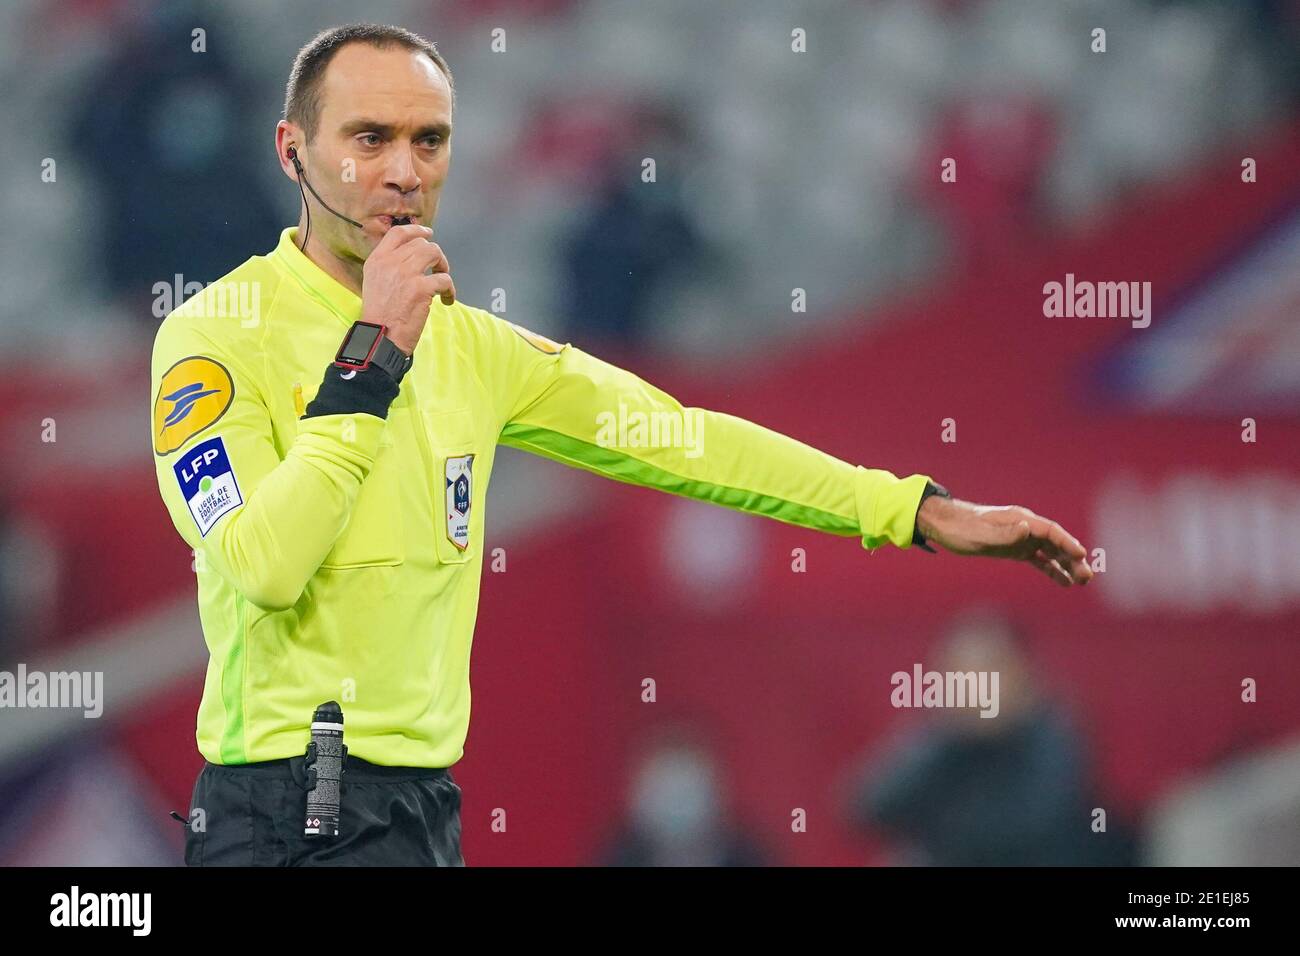 LILLE, FRANCE - JANUARY 6: Referee Thomas Leonard during the Ligue 1 match between Lille OSC and Angers SCO at Stade Pierre Mauroy on January 6, 2021 in Lille, France (Photo by Jeroen Meuwsen/BSR Agency/Alamy Live News)*** Local Caption *** Thomas Leonard Stock Photo